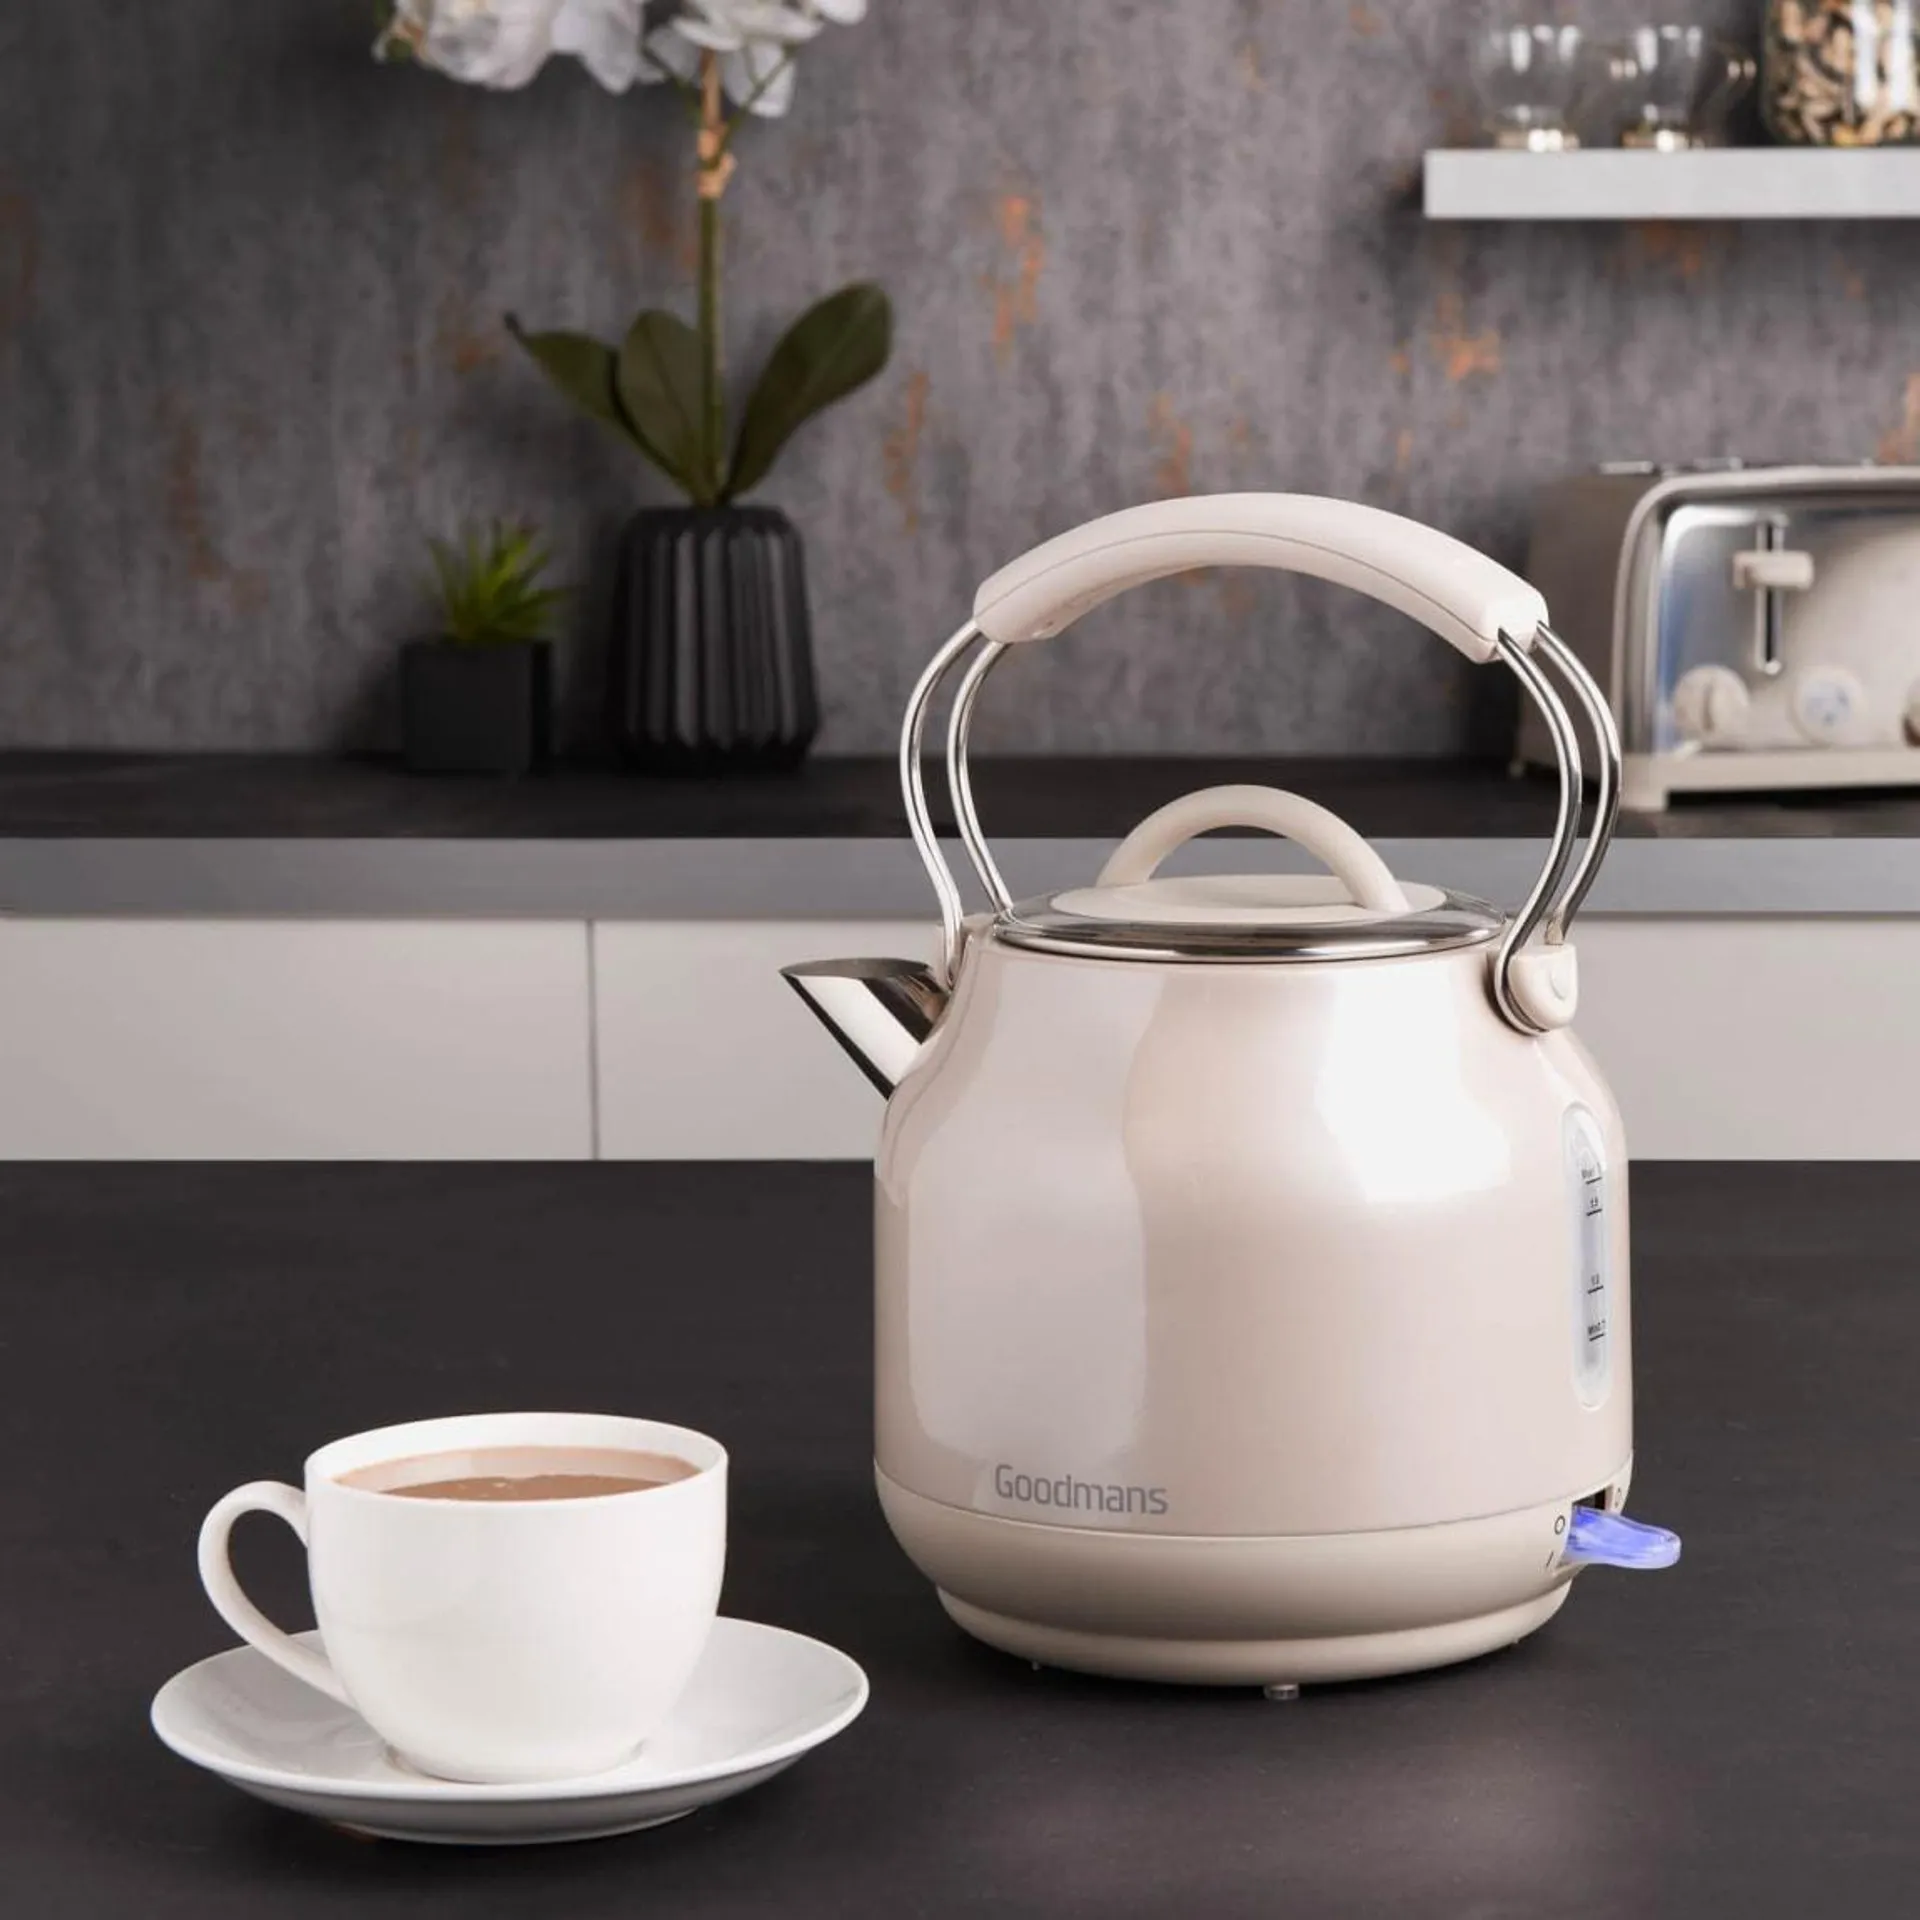 Goodmans Champagne Dome Kettle